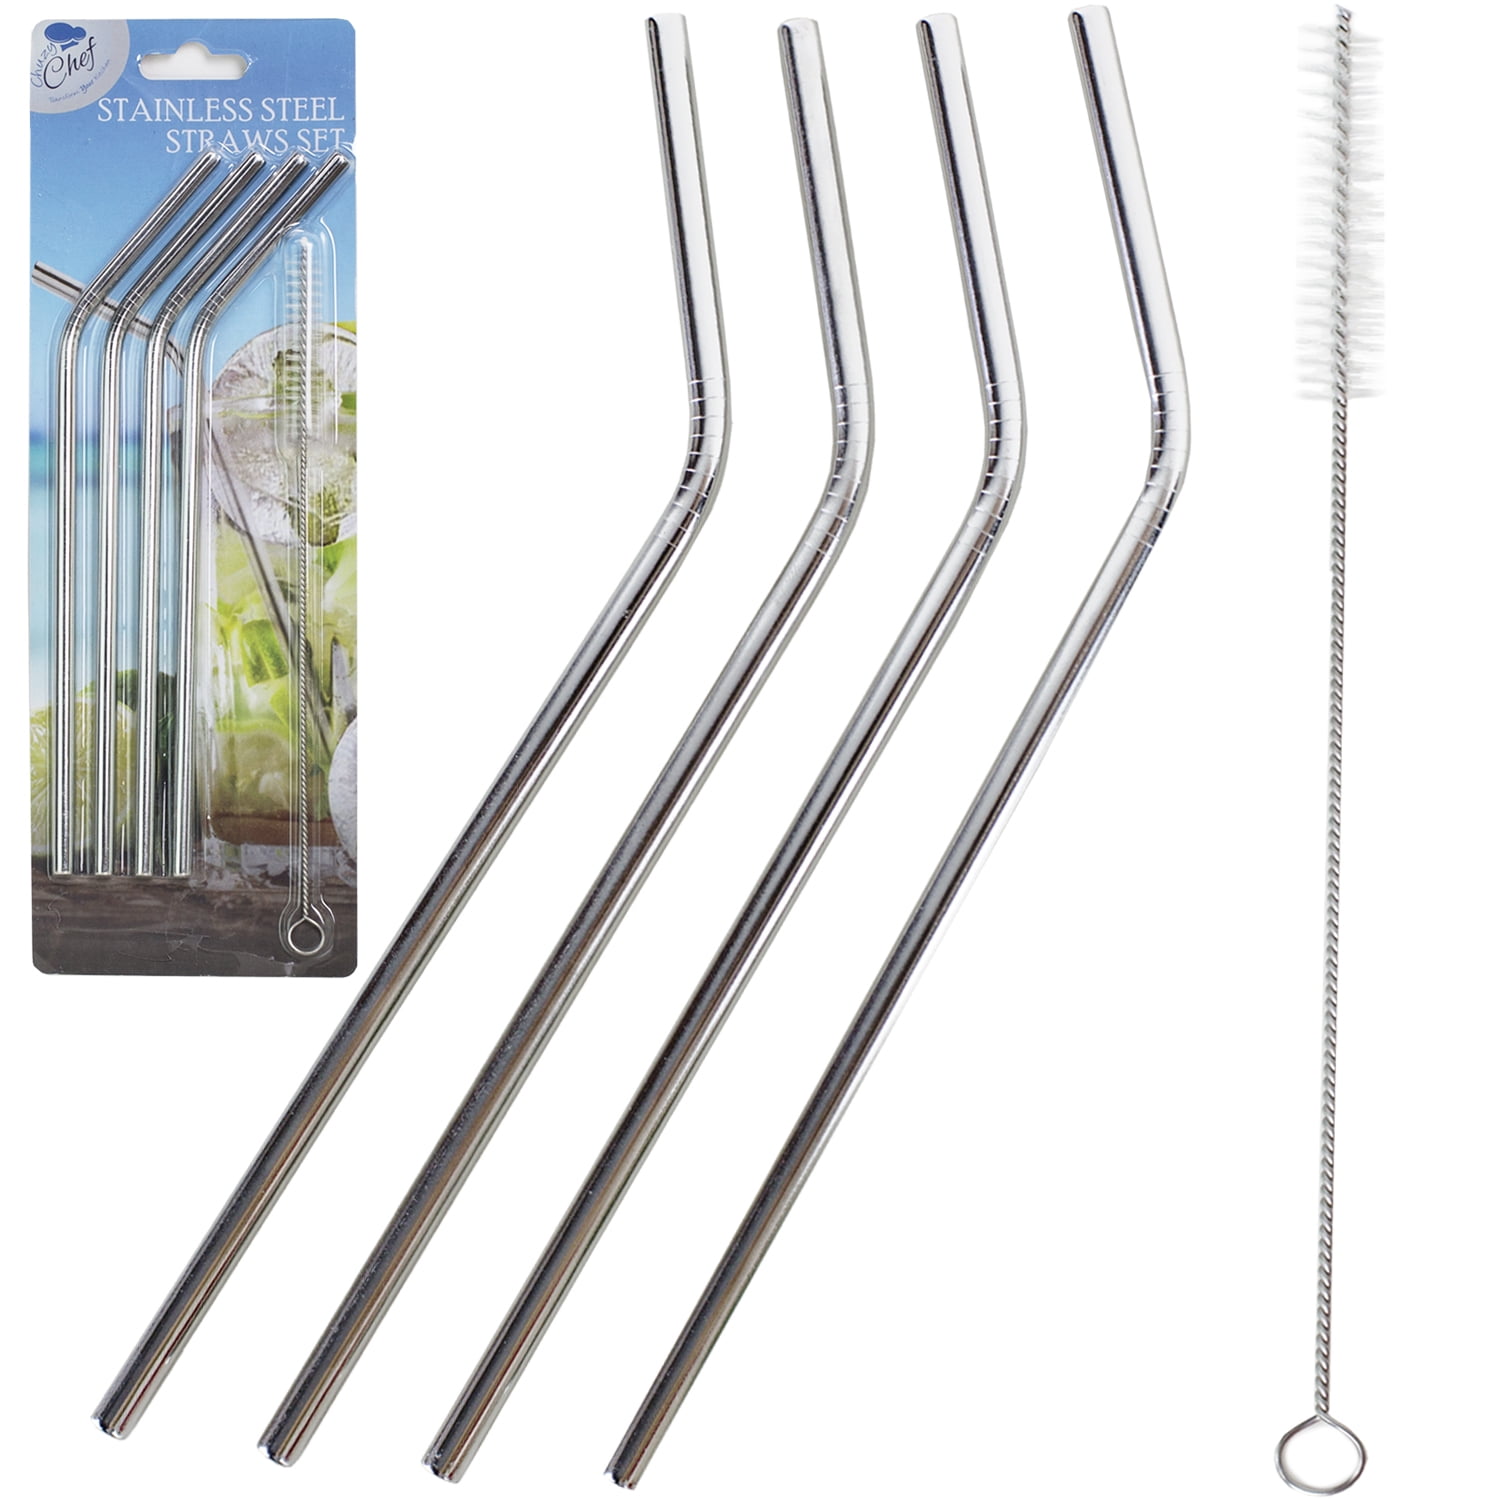 4pc Stainless Steel Metal Silver Reusable Straw Set Extra Wide & Brush & Pouch